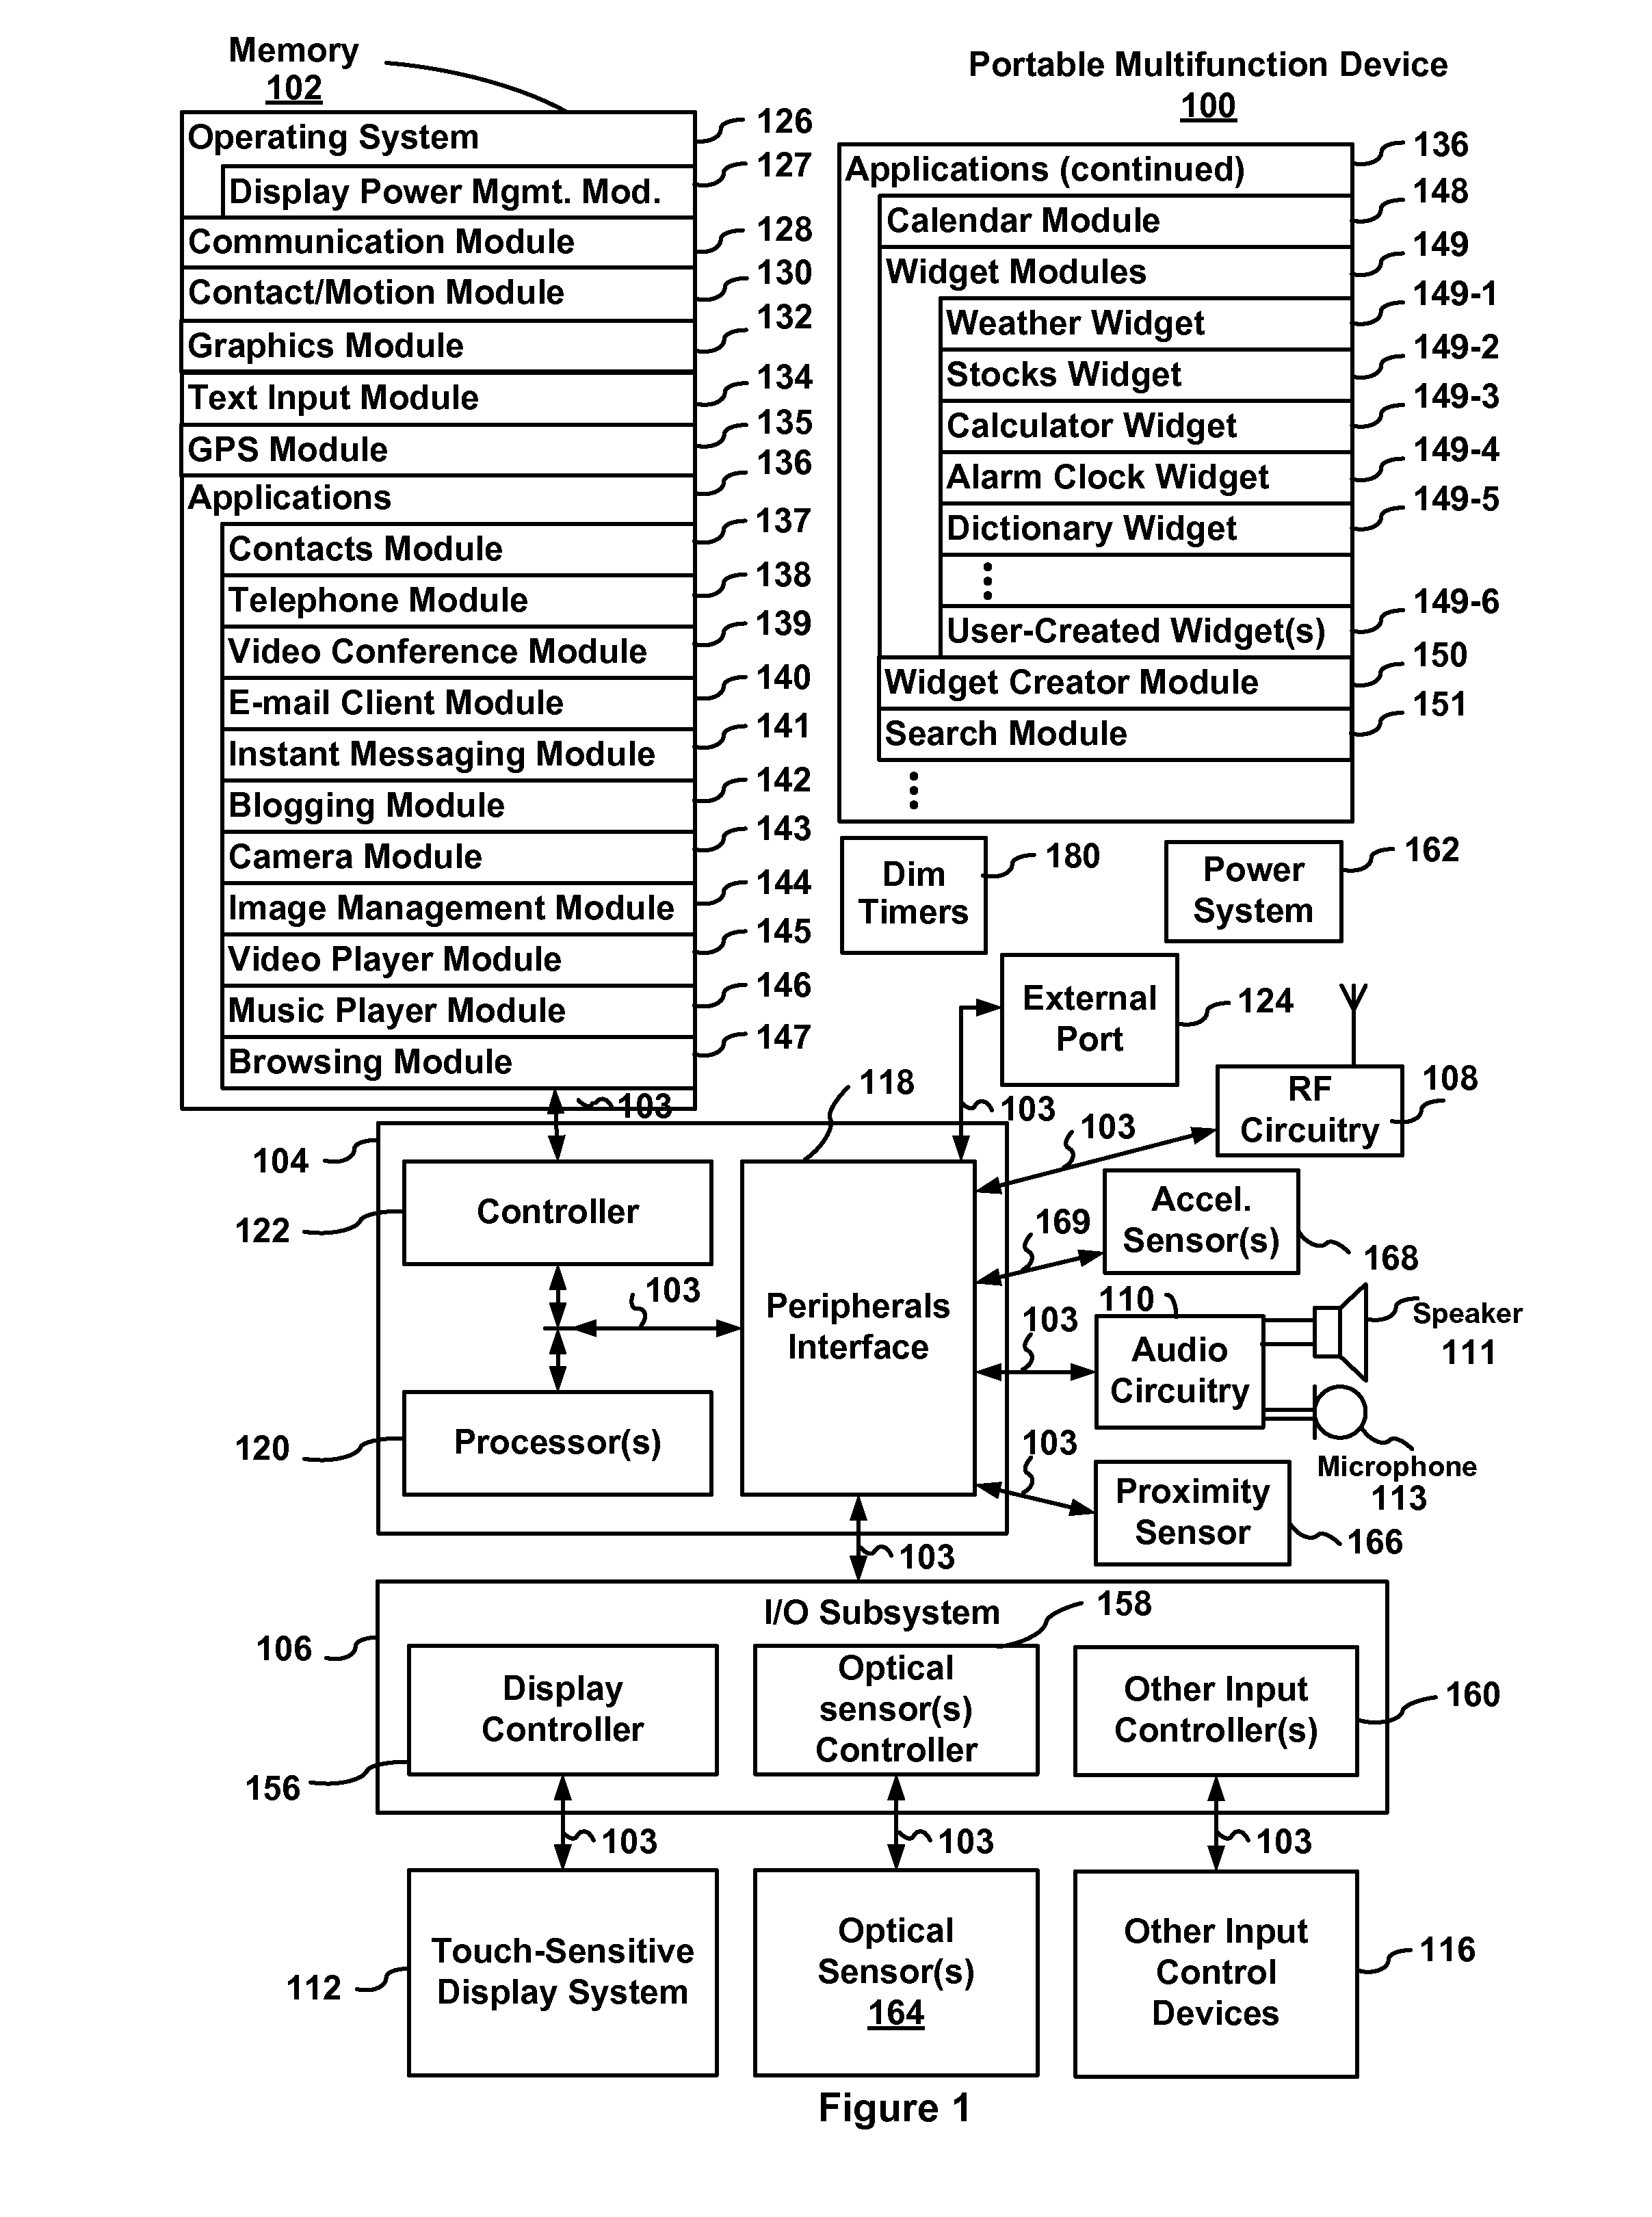 Portable electronic device with auto-dim timers